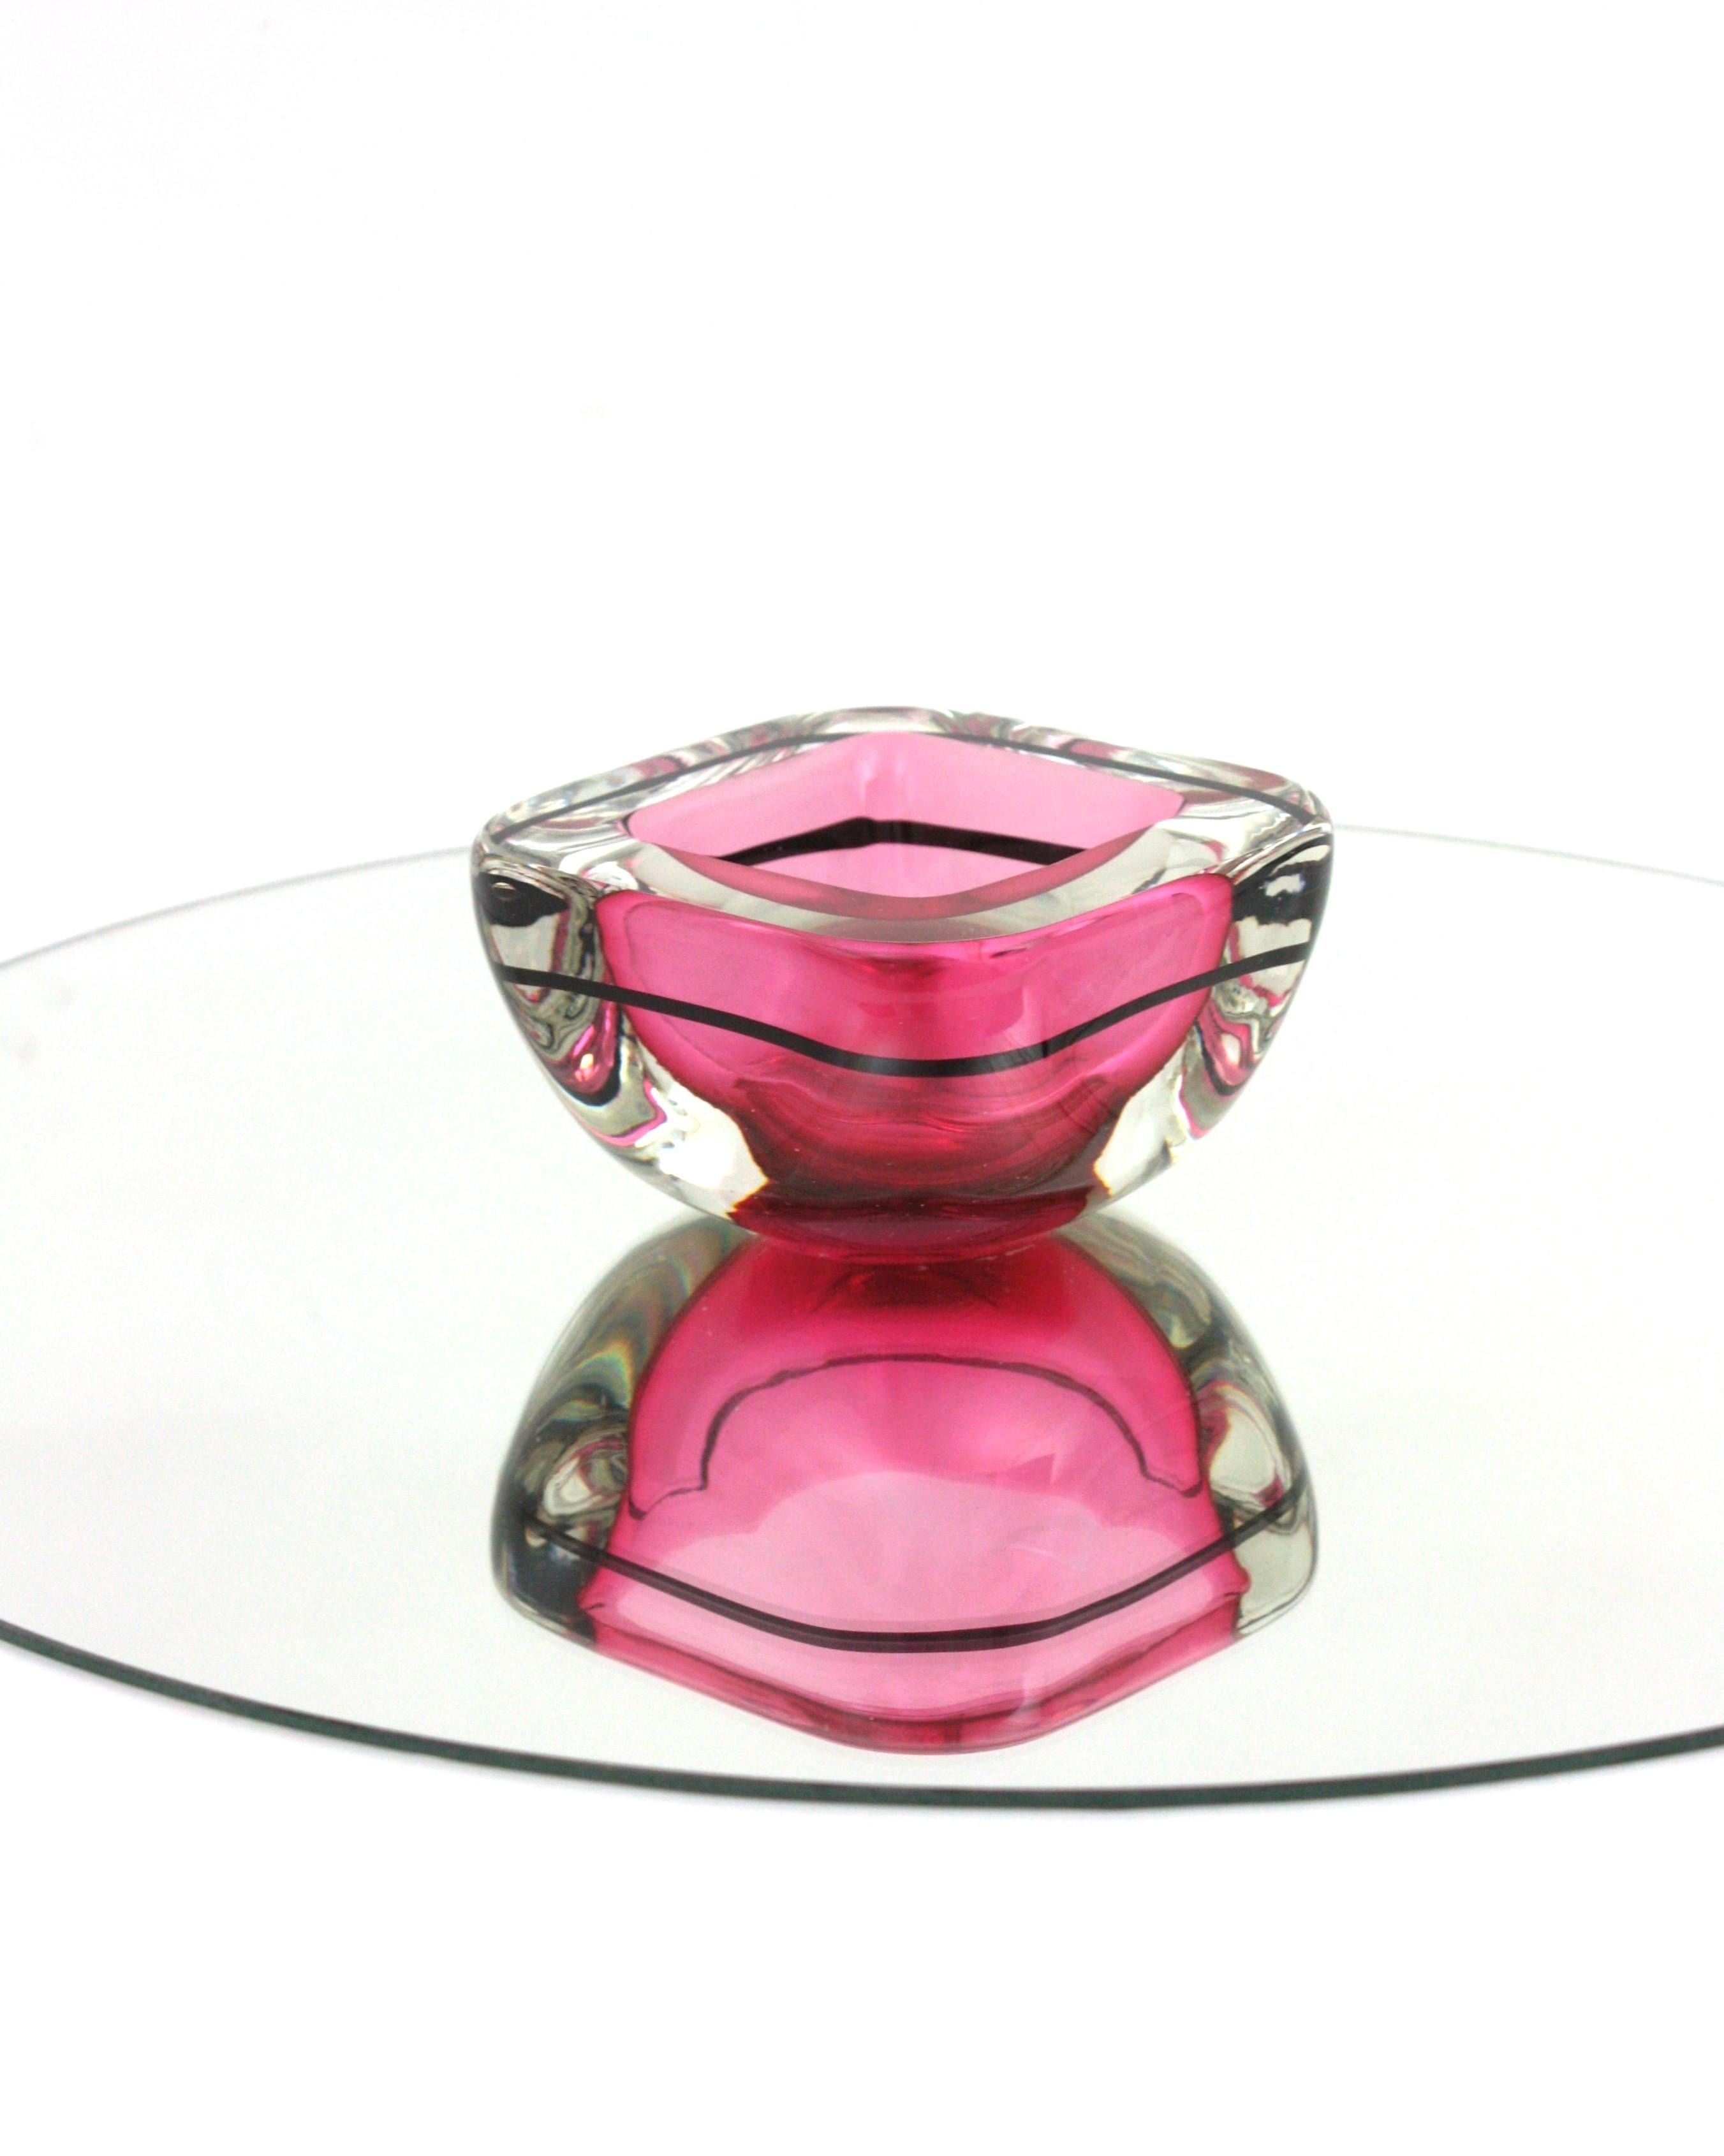 Pink Murano Glass Sommerso Geode Bowl with Black Stripe
Hand blown Murano Sommerso square shaped geode bowl in pink, black and clear glass . Italy, 1960s.
Eye-catching color in vibrant pink cased into clear glass using the 